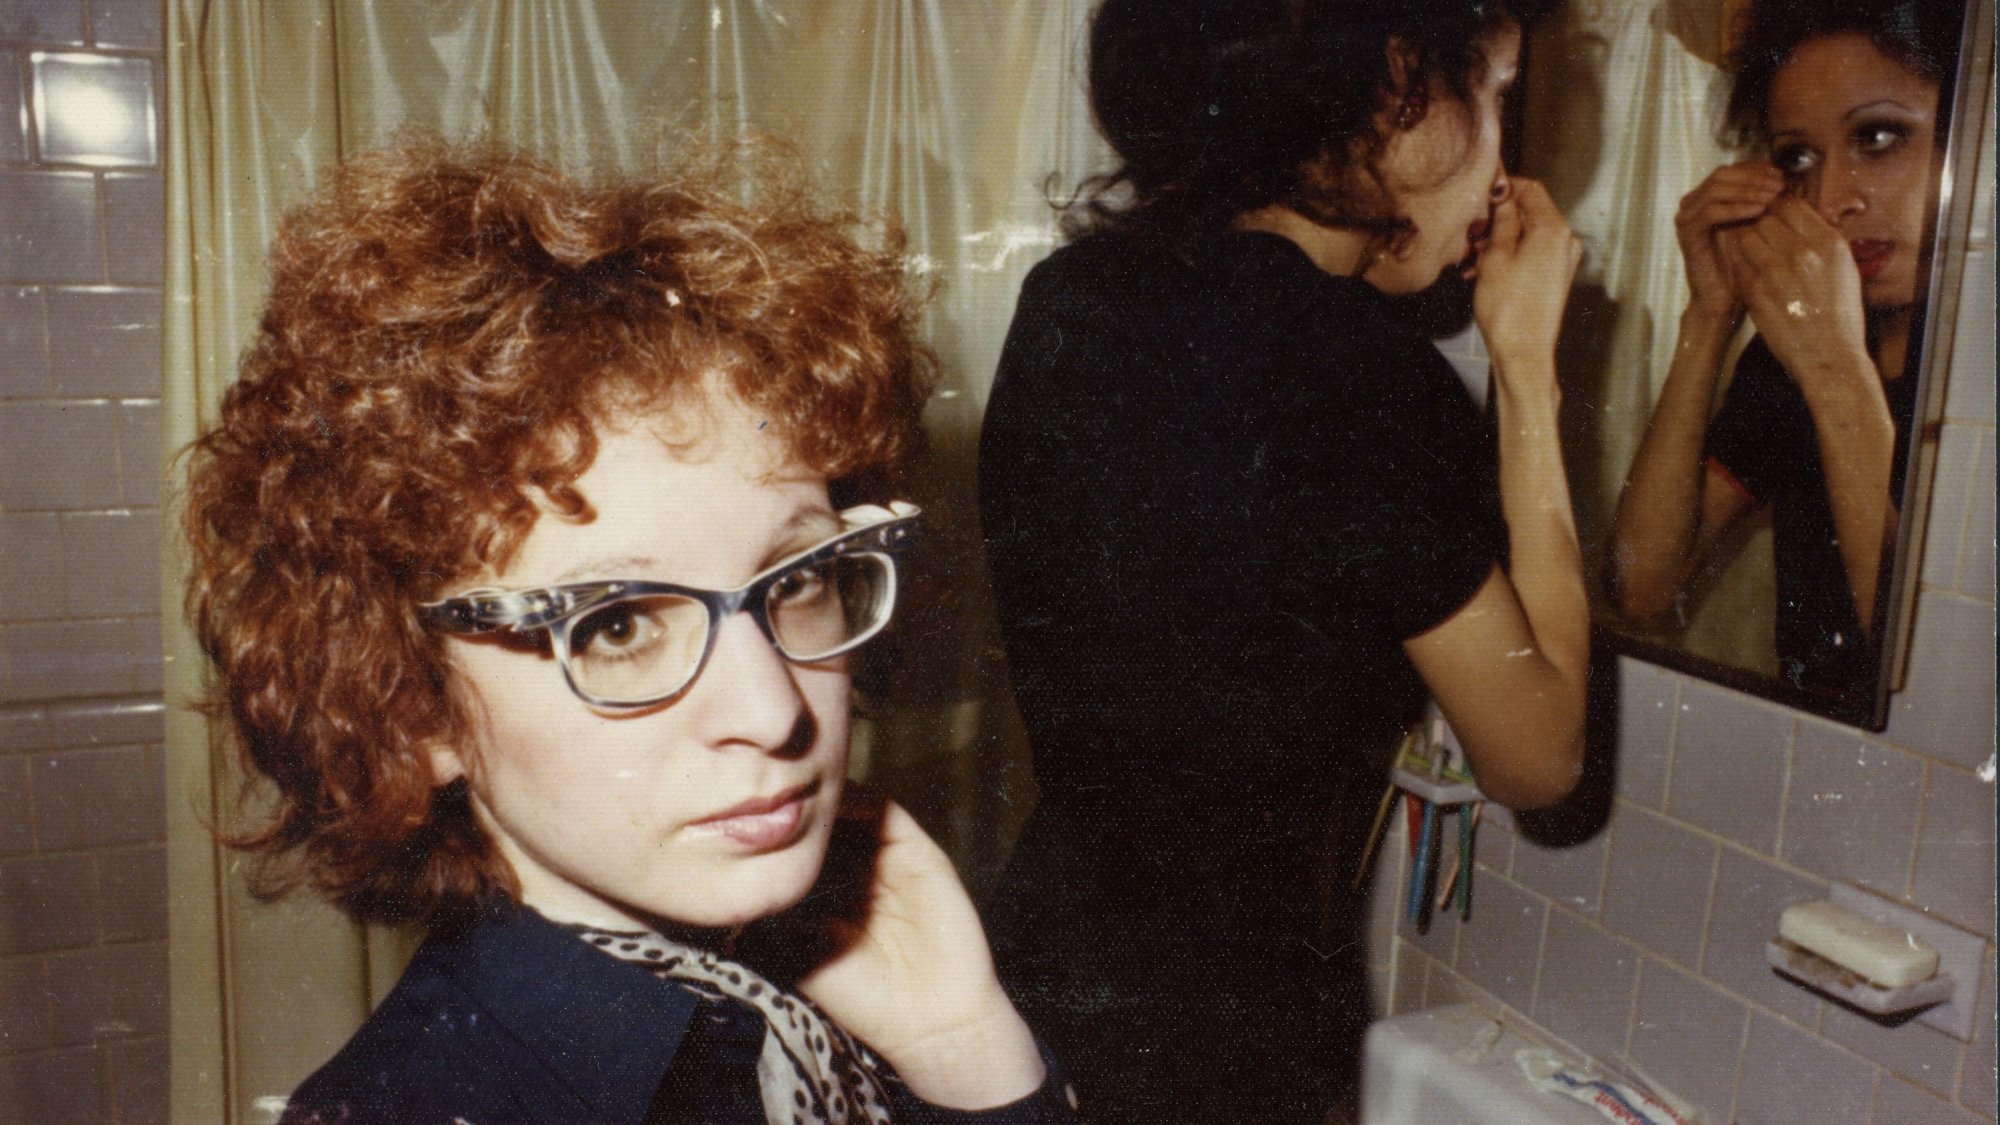 Two women in a bathroom: one of them, with red curly hair and glasses, looks directly in the camera, while the other applies makeup in the mirror.